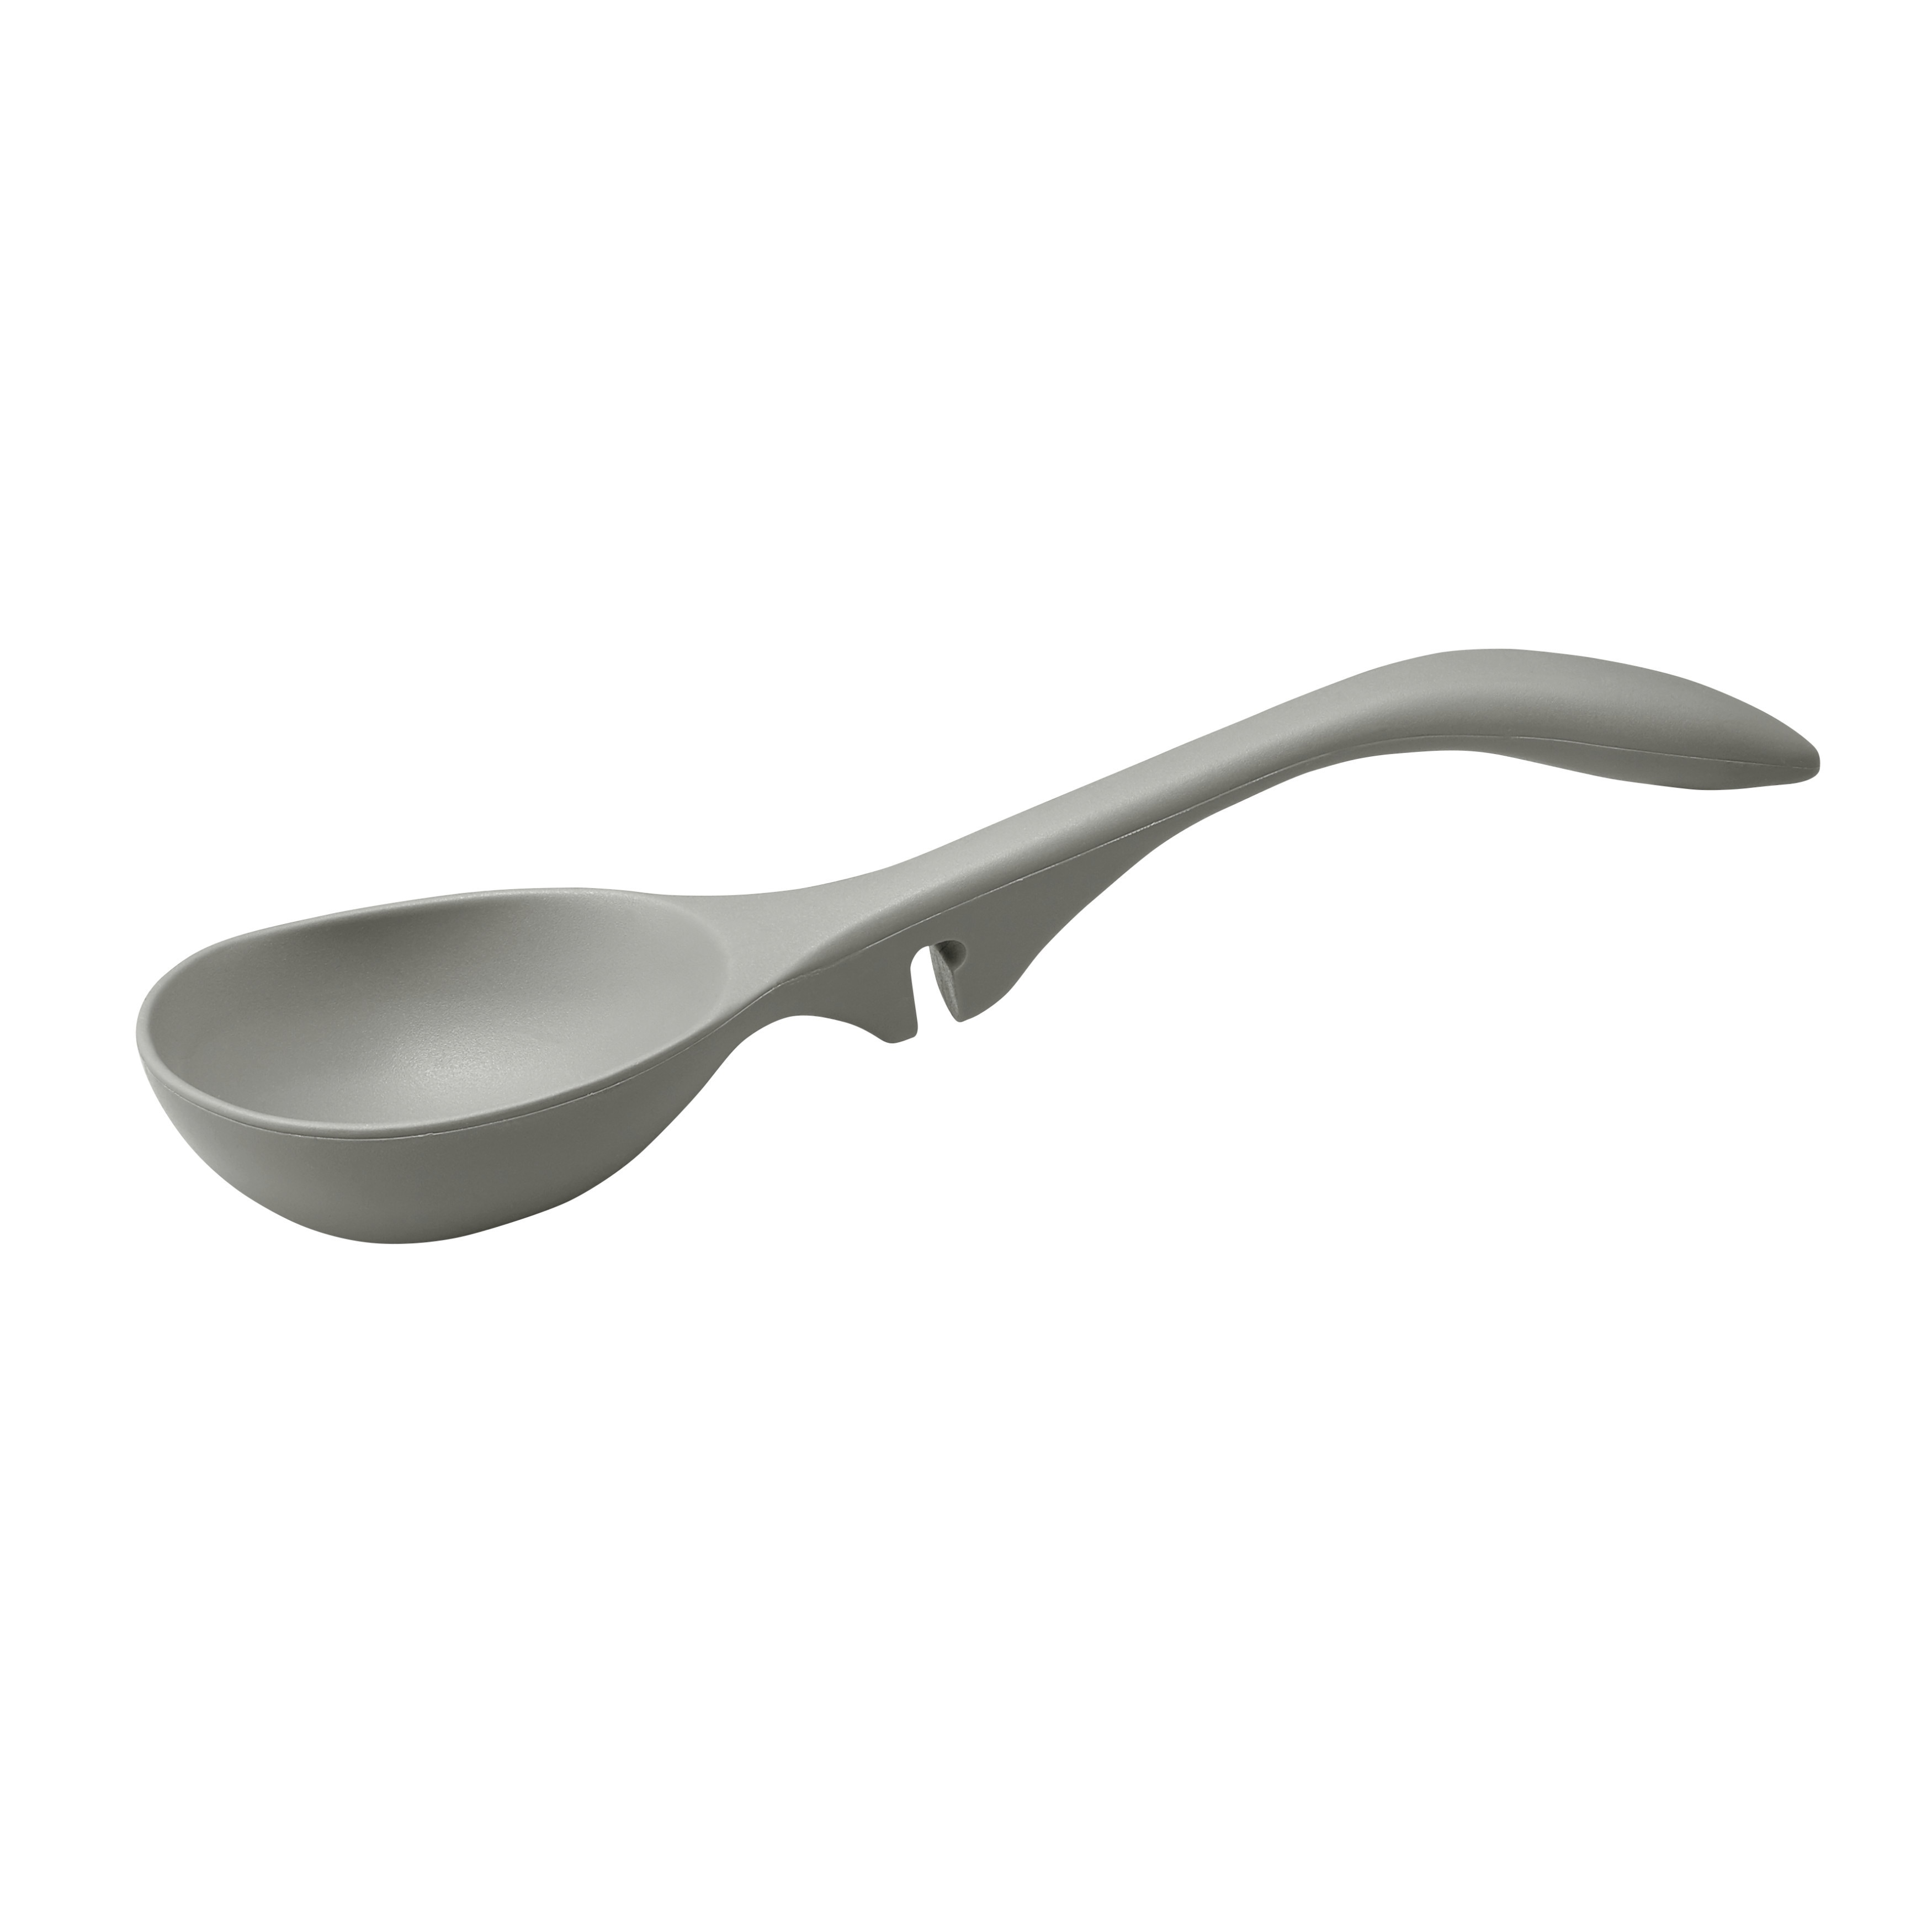 Tools & Gadgets Lazy Ladle and Spoon Set